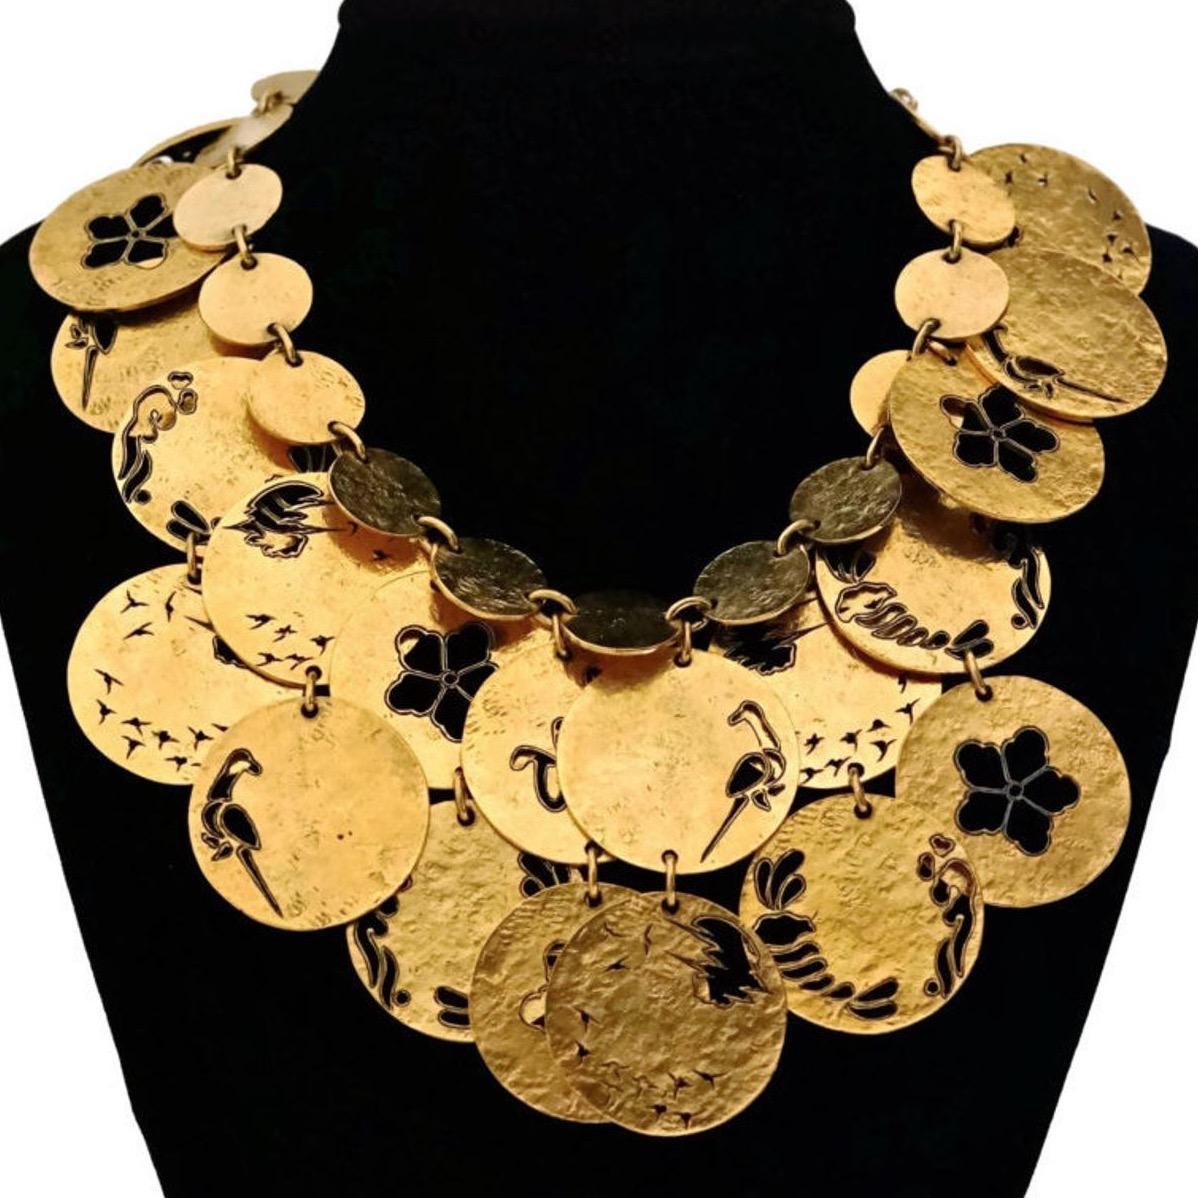 Vintage SONIA RYKIEL Openwork Disc Bib Necklace

Measurements:
Height: 3 3/8 inches
Wearable Length: 15 inches to 16 inches

Features:
- 100% Authentic SONIA RYKIEL.
- Multi later discs with open work Flowers, Birds and SR logo pattern.
- Opulent